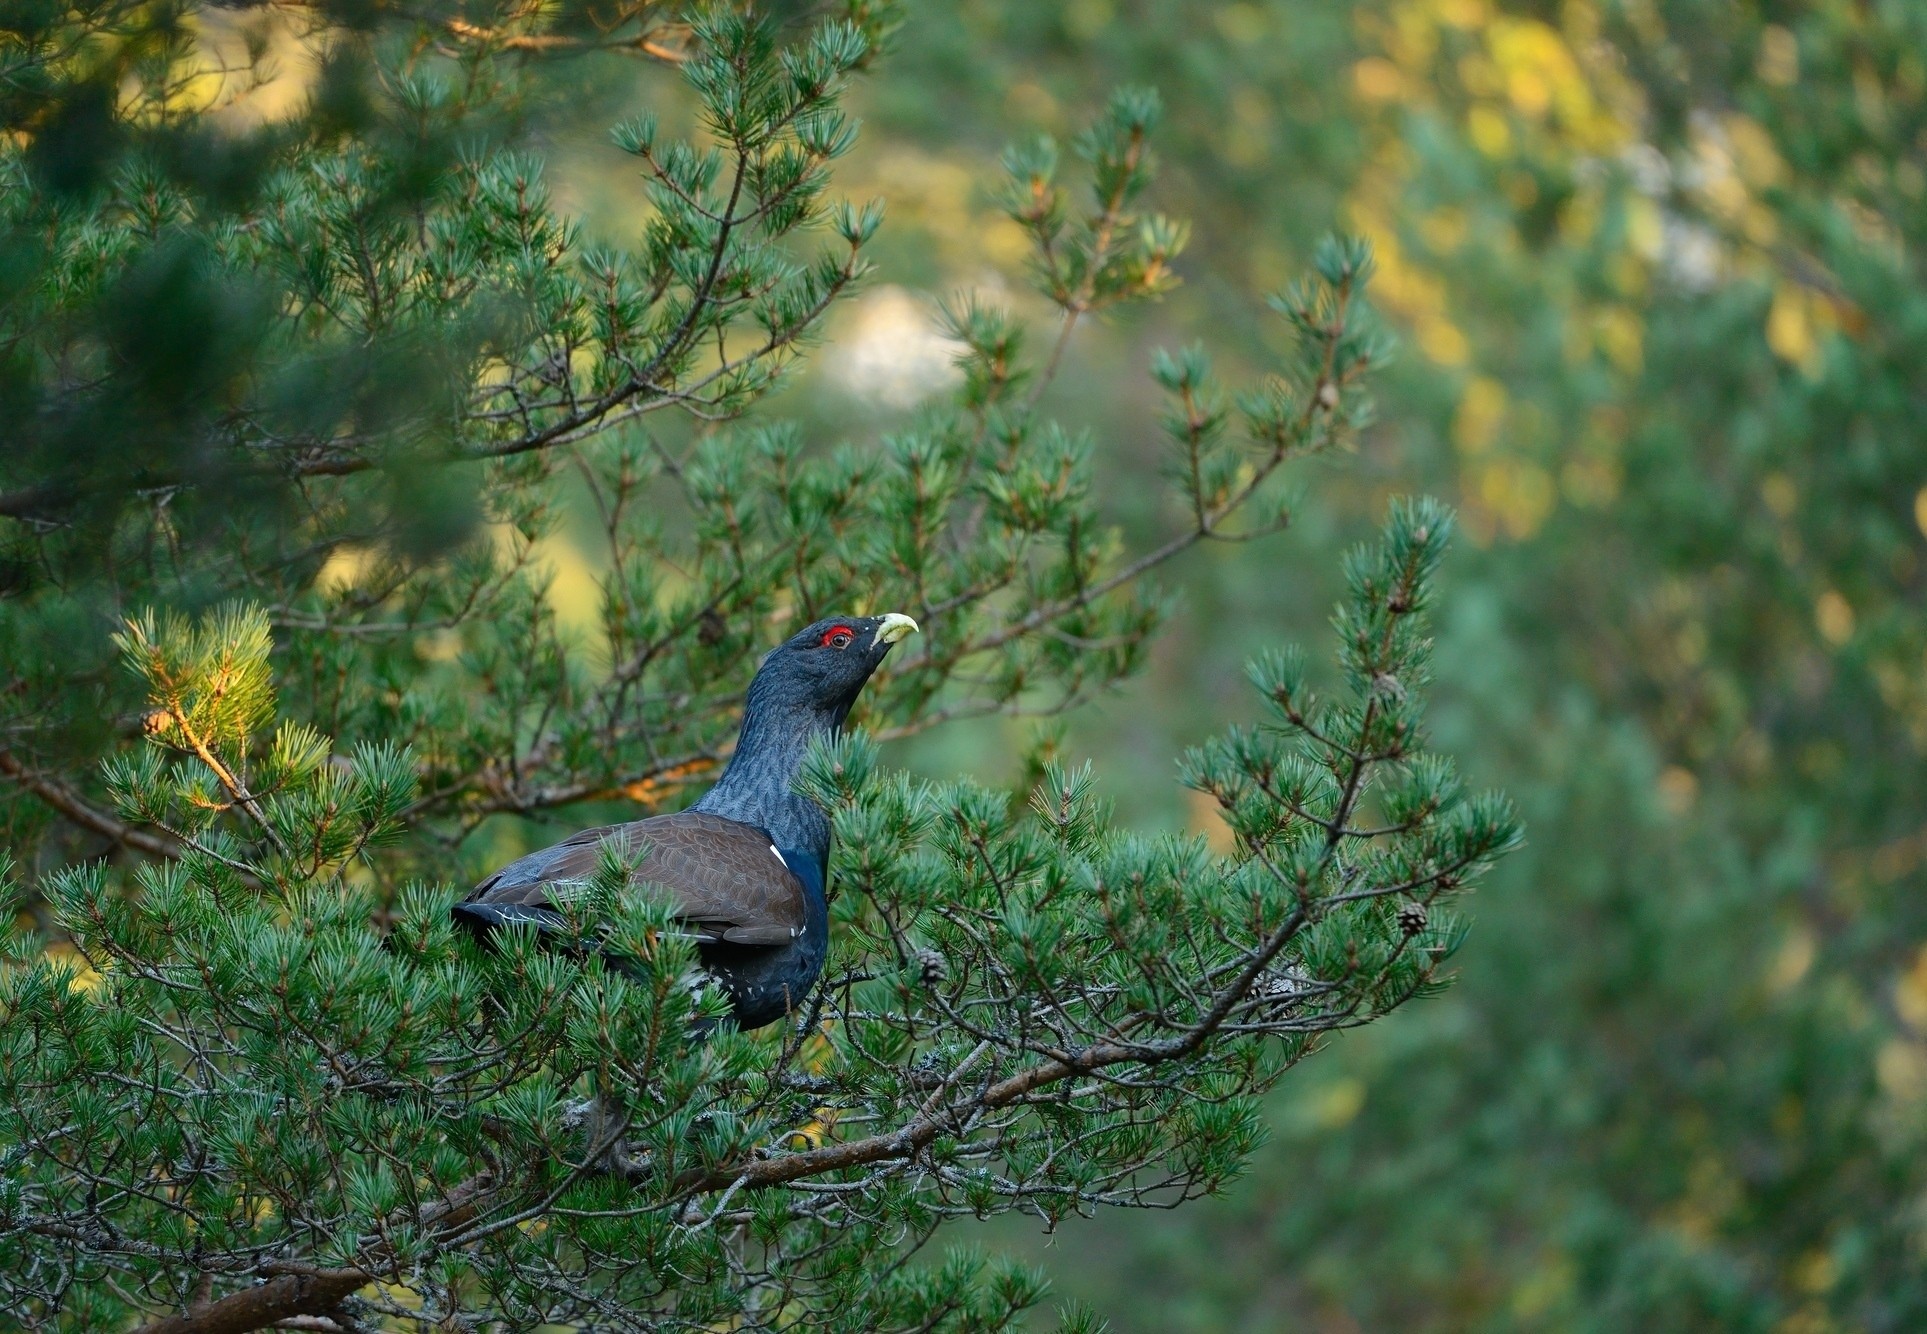 General 1927x1334 animals birds wildlife nature trees pine trees green branch depth of field capercaillie